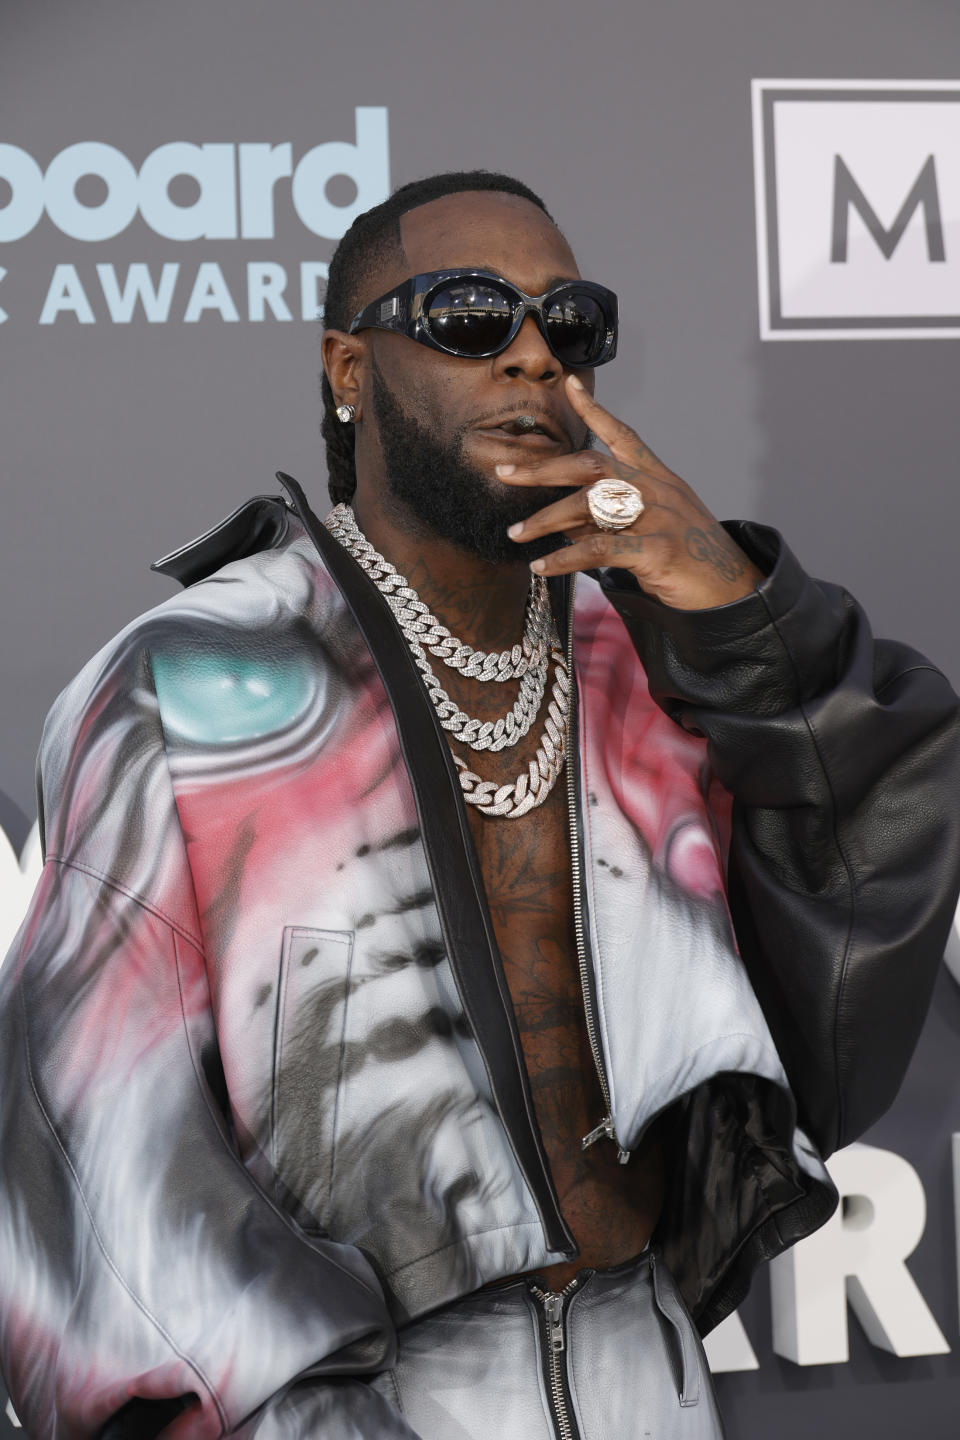 Burna Boy attends the 2022 Billboard Music Awards at MGM Grand Garden Arena on May 15, 2022 in Las Vegas, Nevada. - Credit: Frazer Harrison/Getty Images